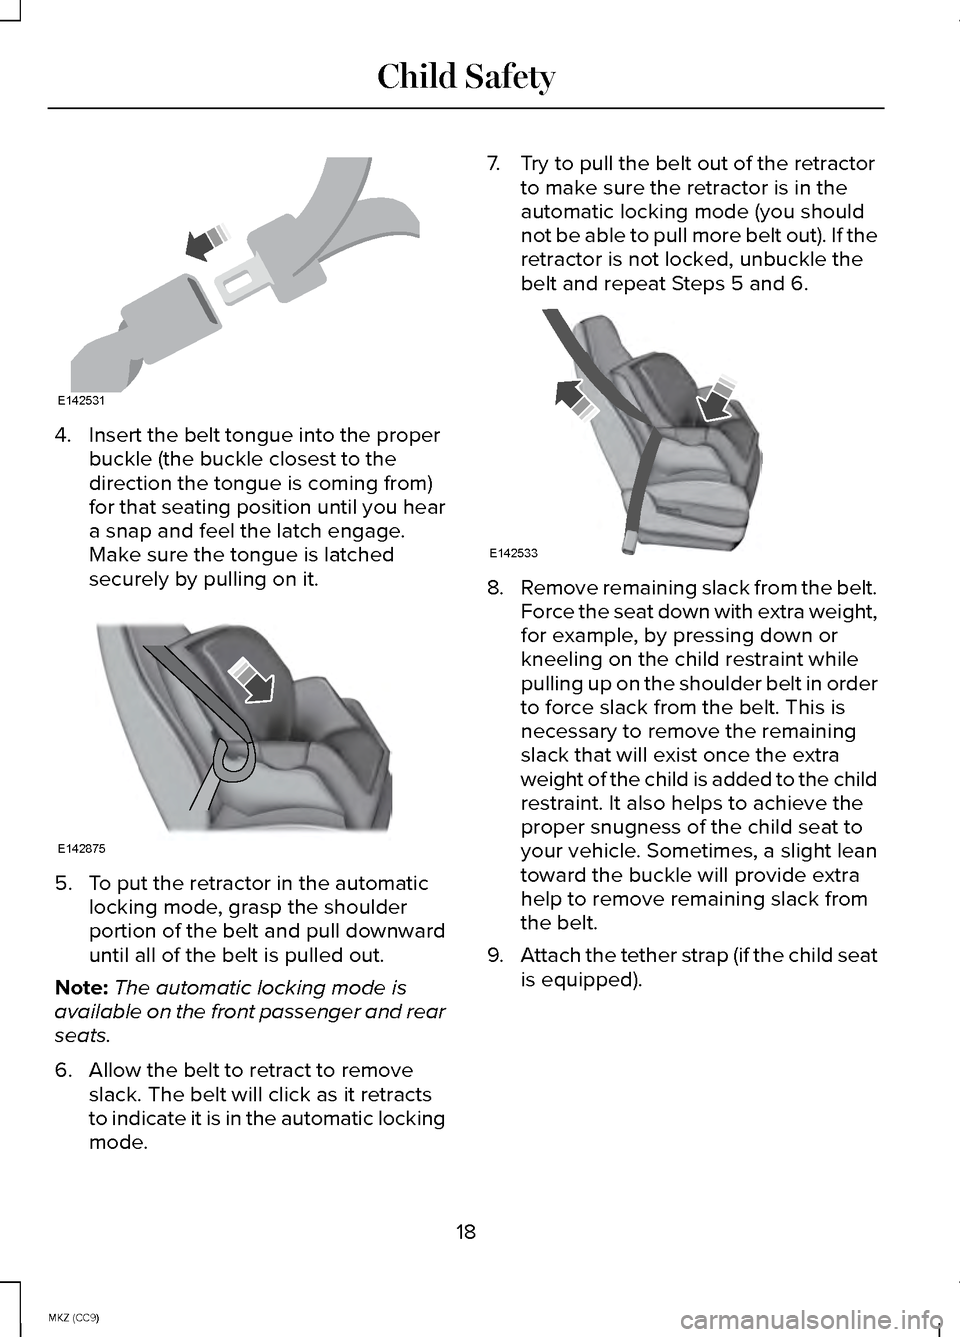 LINCOLN MKZ HYBRID 2014  Owners Manual 4. Insert the belt tongue into the proper
buckle (the buckle closest to the
direction the tongue is coming from)
for that seating position until you hear
a snap and feel the latch engage.
Make sure th